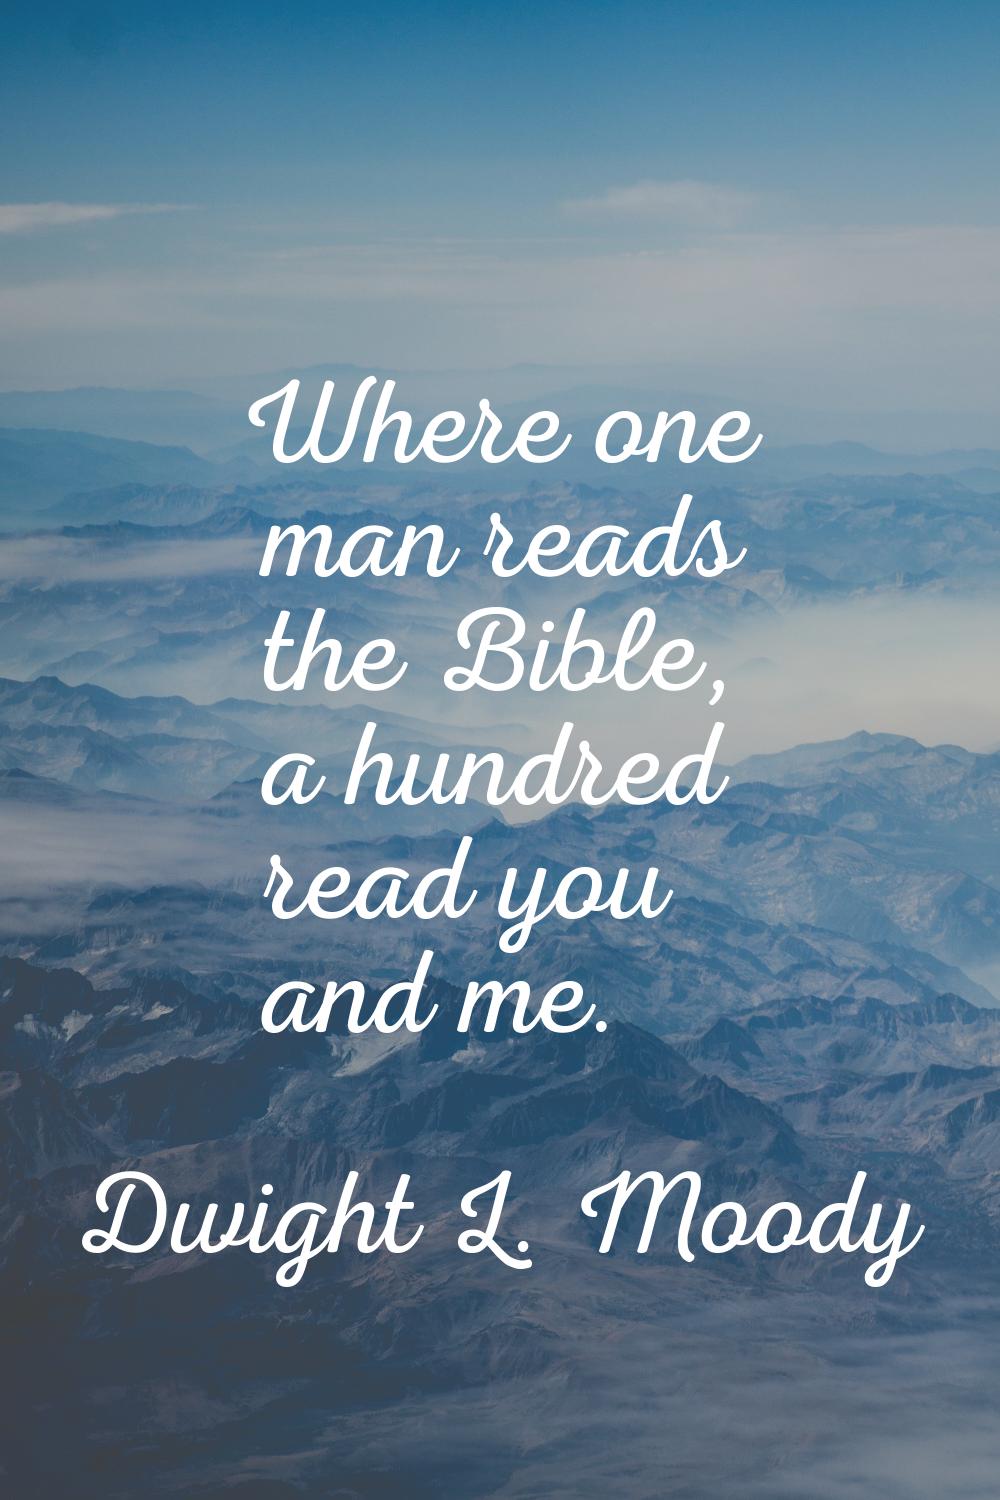 Where one man reads the Bible, a hundred read you and me.